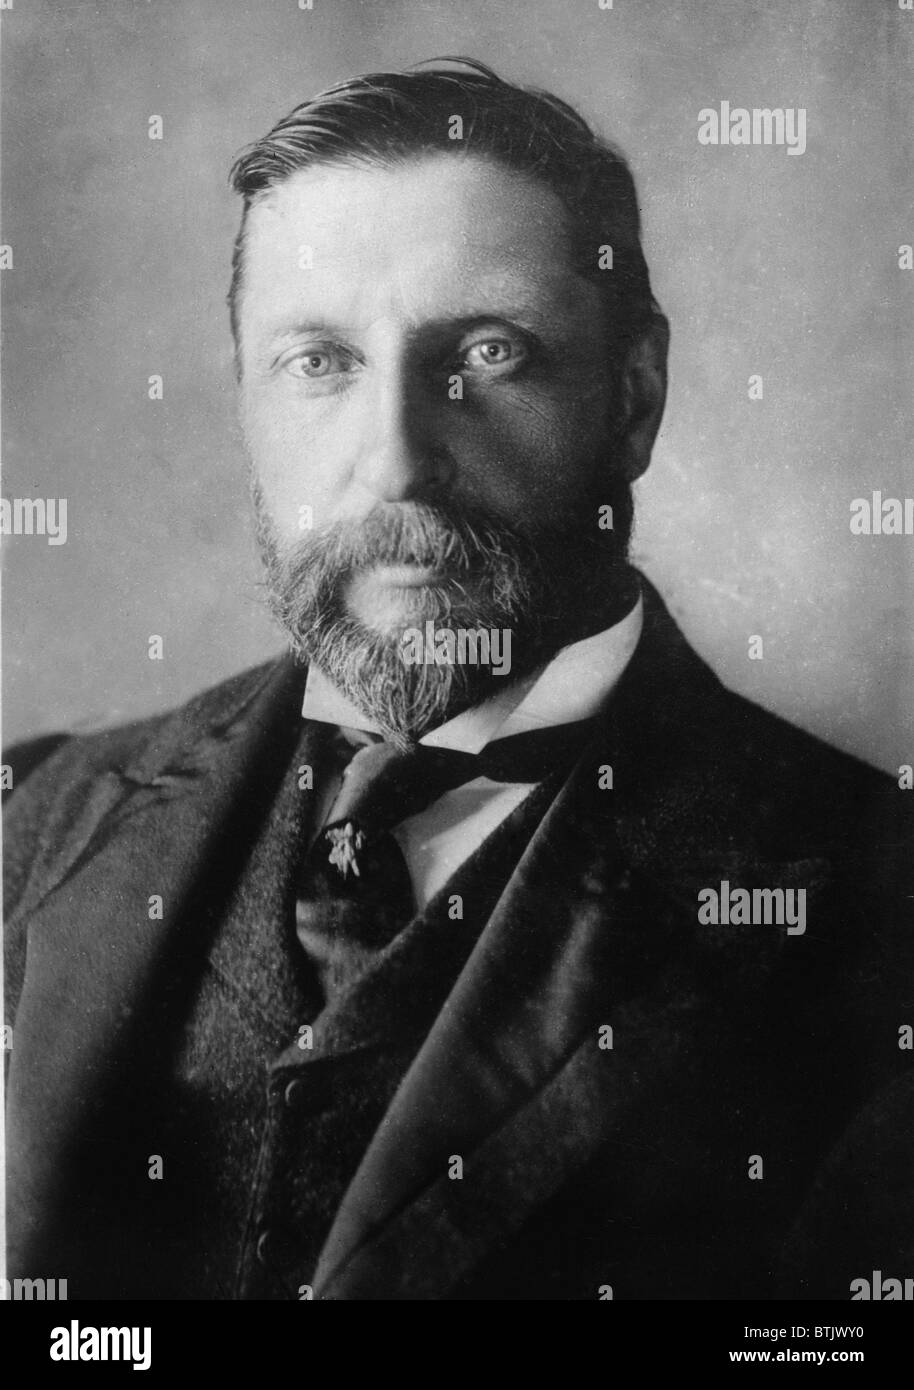 H. Rider Haggard (1856-1925) English novelist of adventure stories, best known for 'King Solomon's Mines' and 'She'. Ca. 1920 Stock Photo